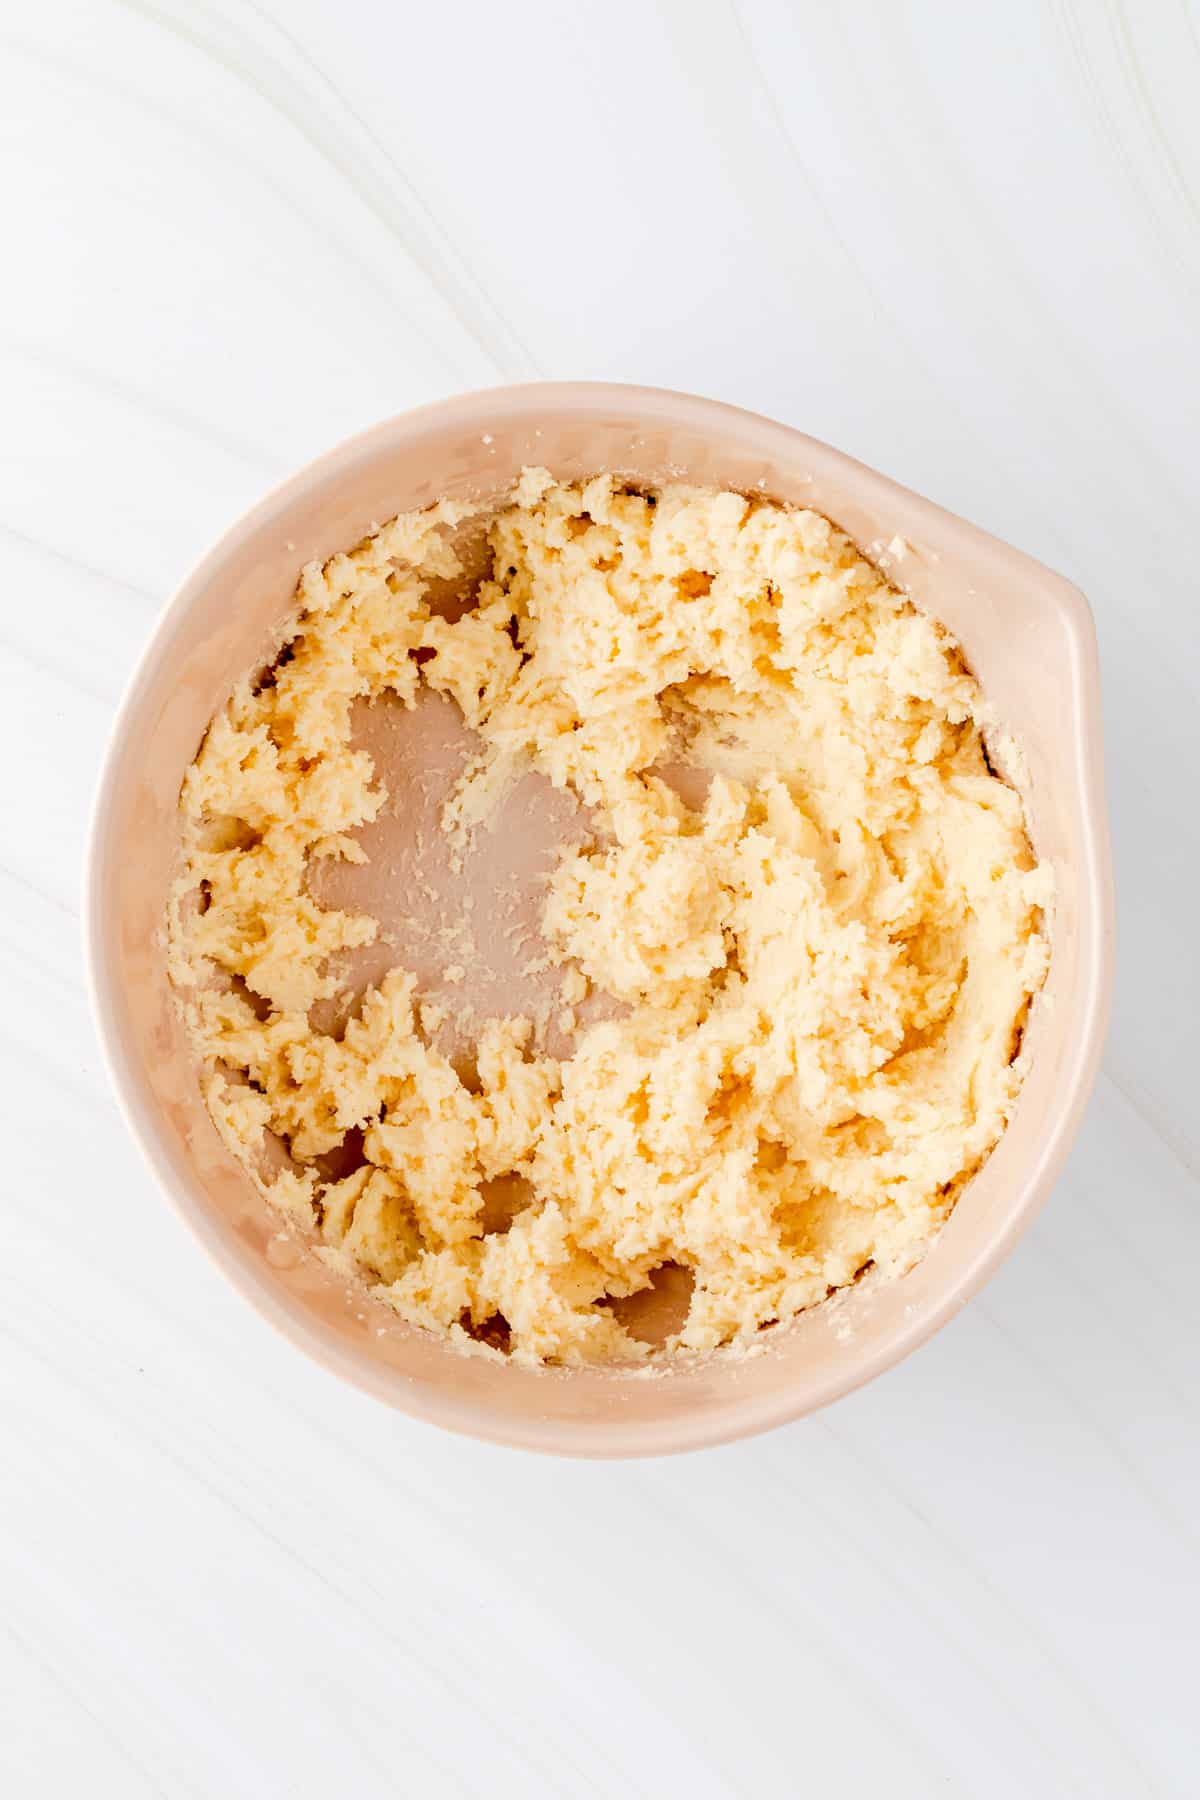 Cream butter and sugar in a tan mixing bowl on white background.